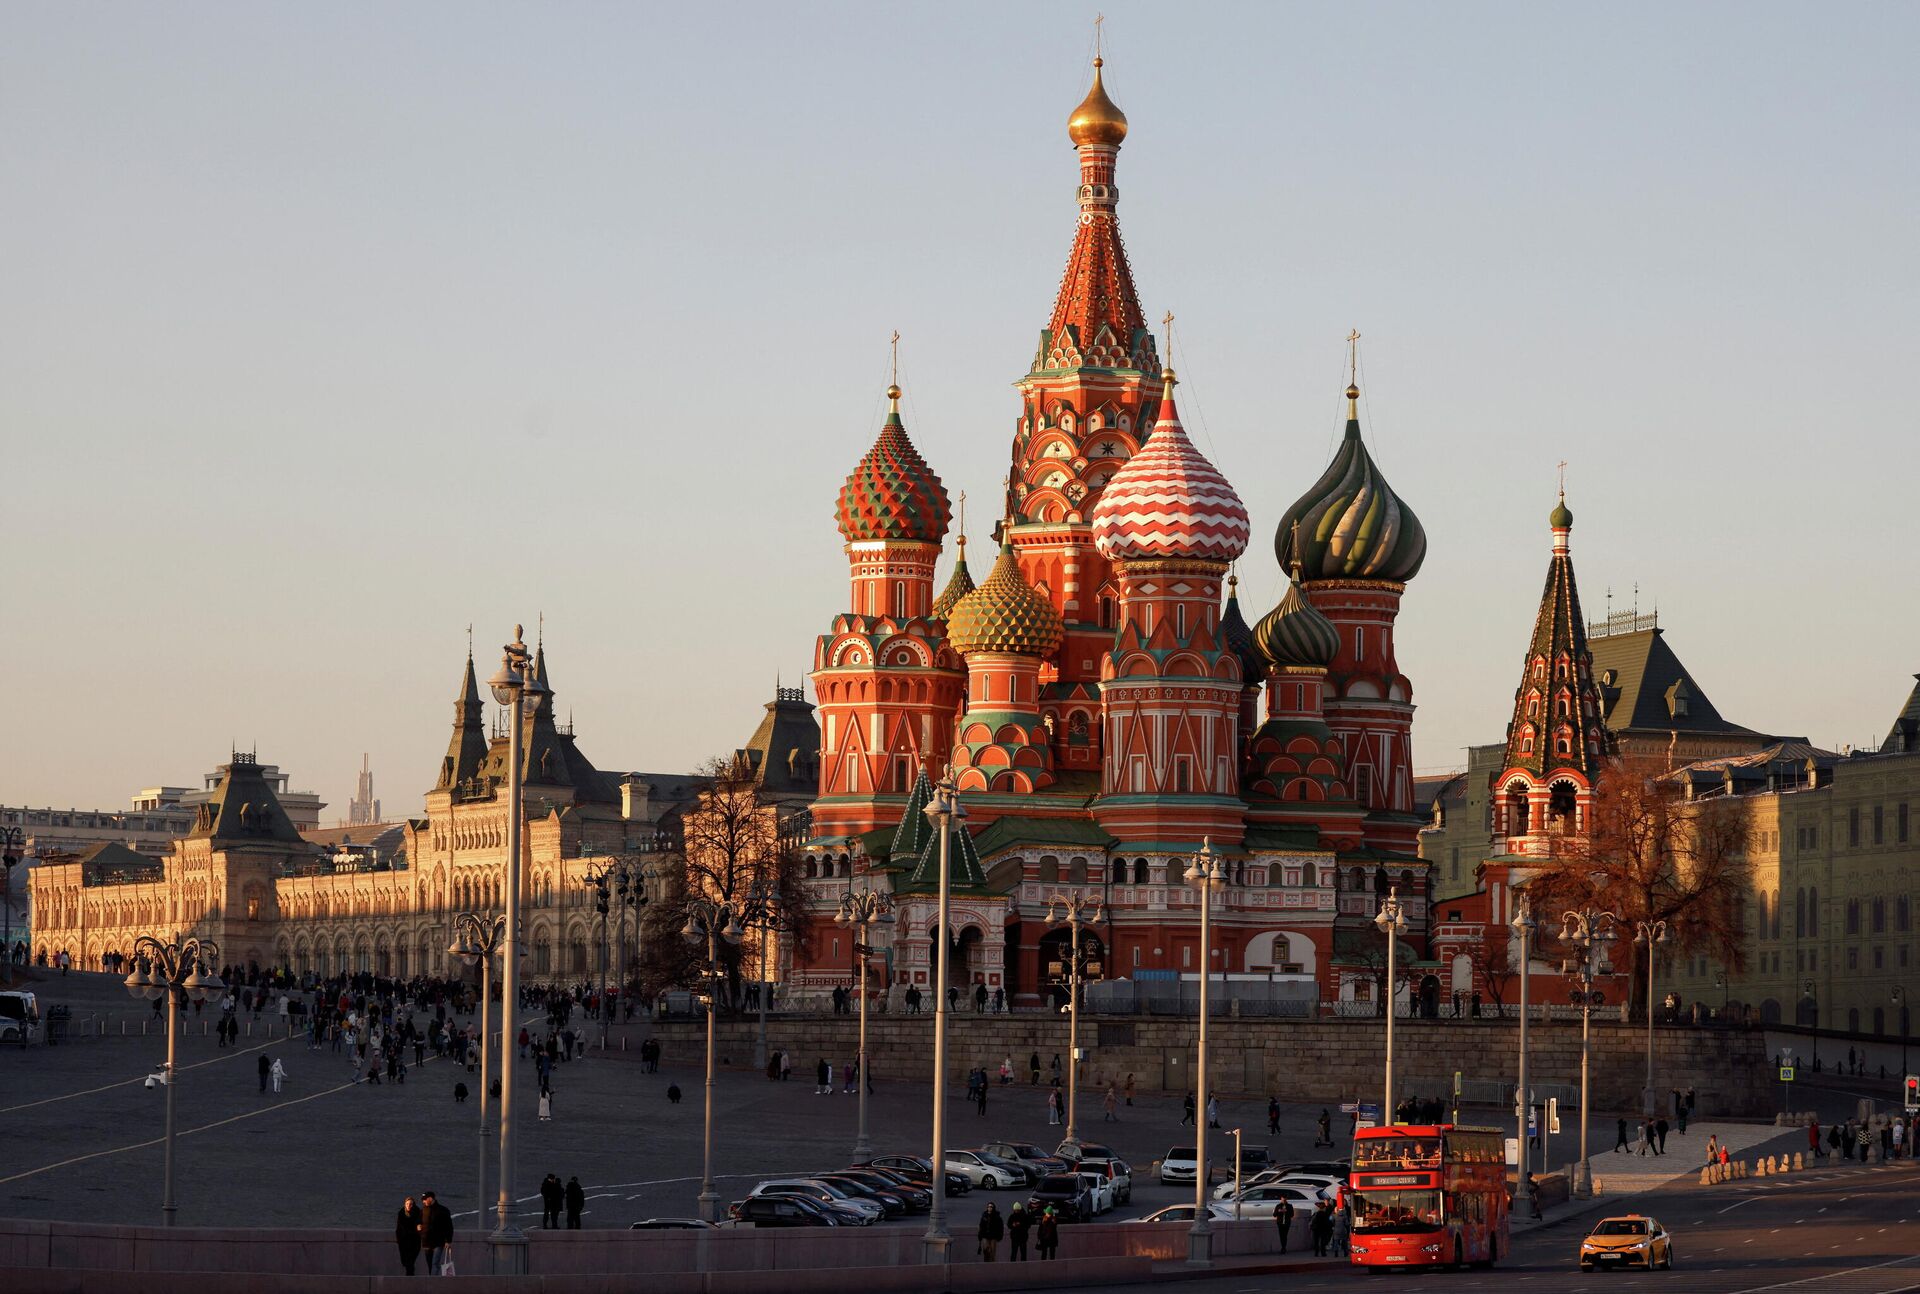 FILE PHOTO: A view shows the St. Basil's Cathedral in central Moscow - Sputnik International, 1920, 11.03.2022